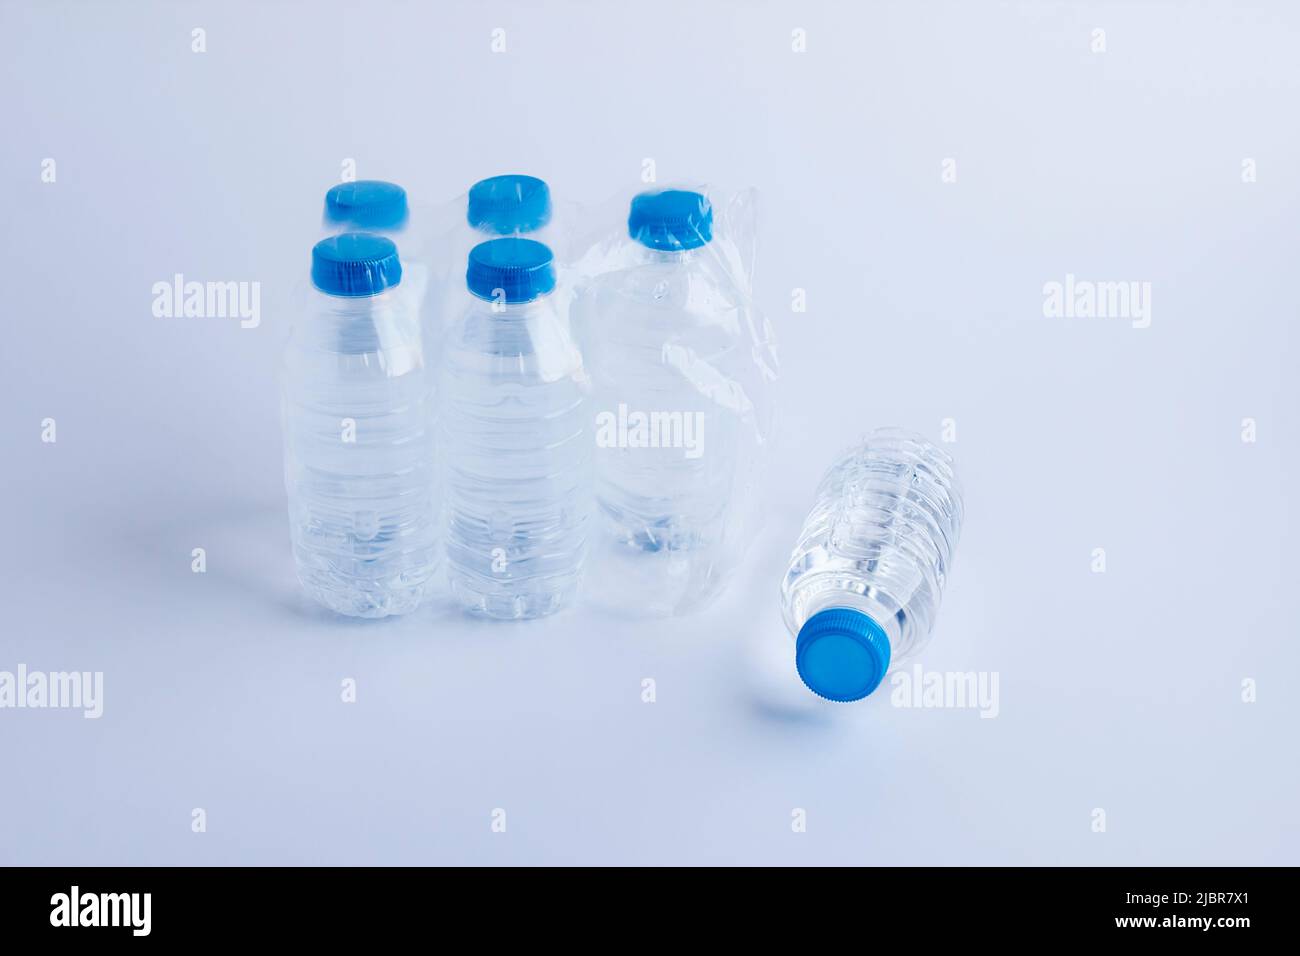 Bottled Water in Six Sizes Stock Photo by ©ginosphotos1 15818829